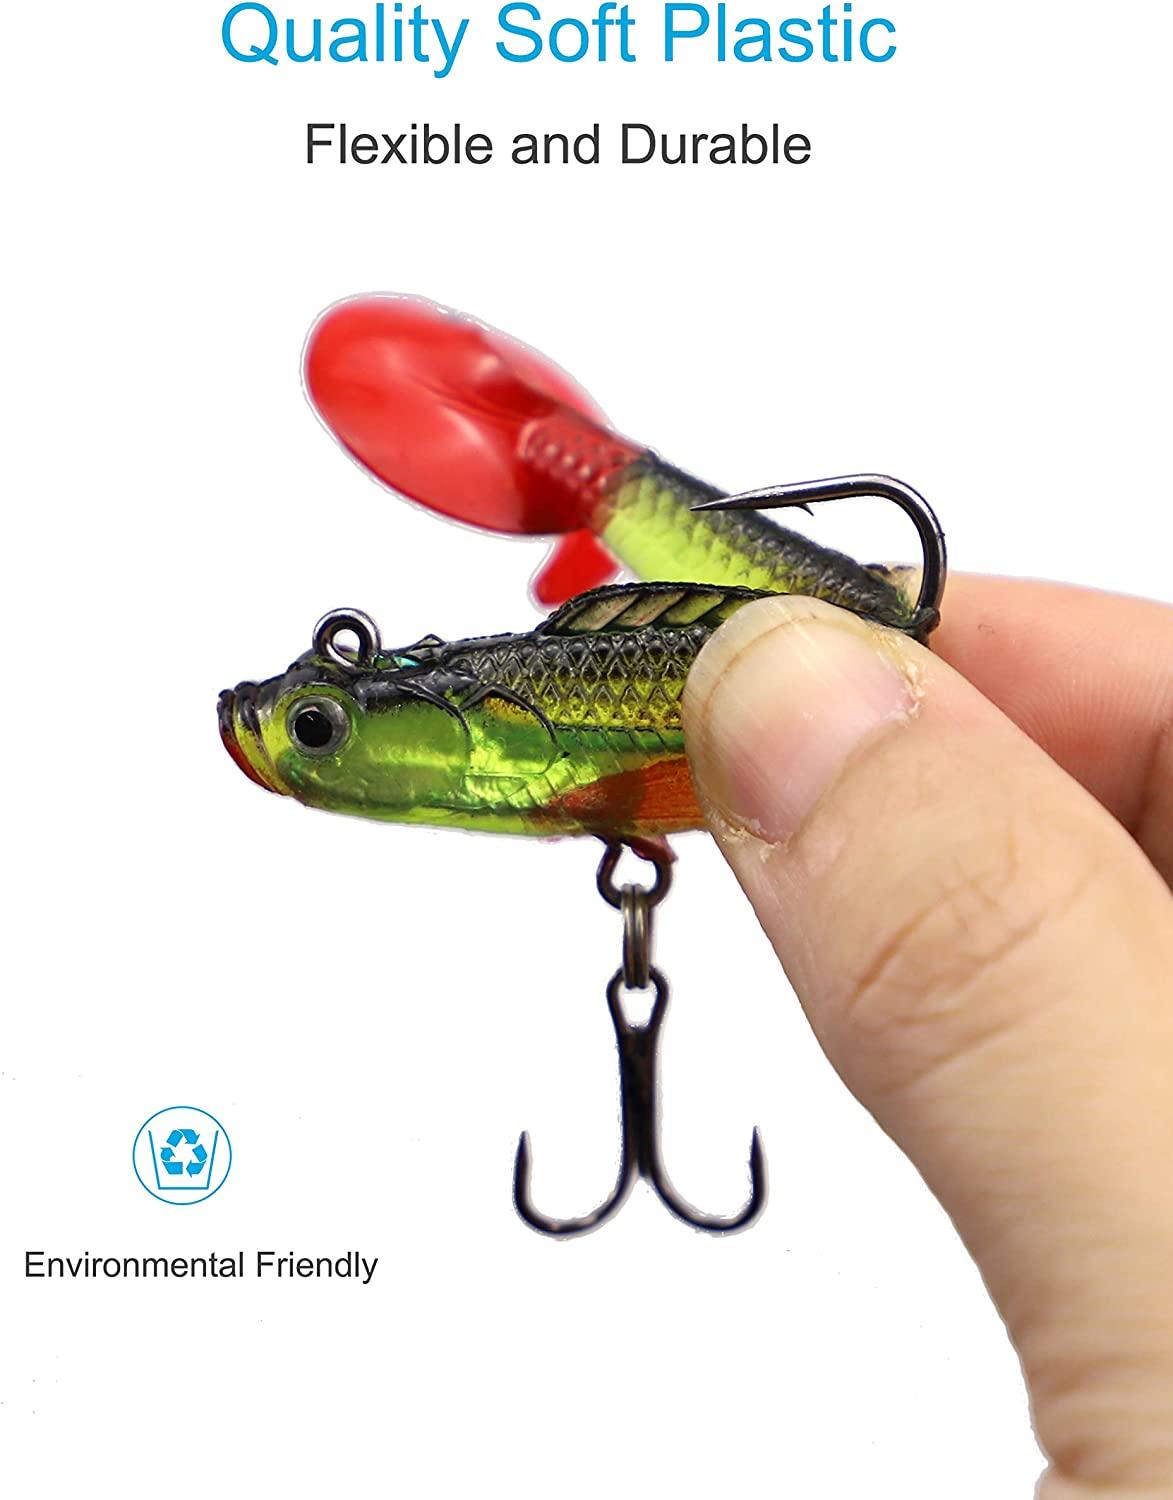 Neinkie 8Pcs/Set 5.5cm/1.3g Soft Fishing Lures for Bass Jig Head Fishing  Soft Plastic Lures with Hook Sinking Swimbaits for Saltwater and Freshwater  Fishing Lures Kit 